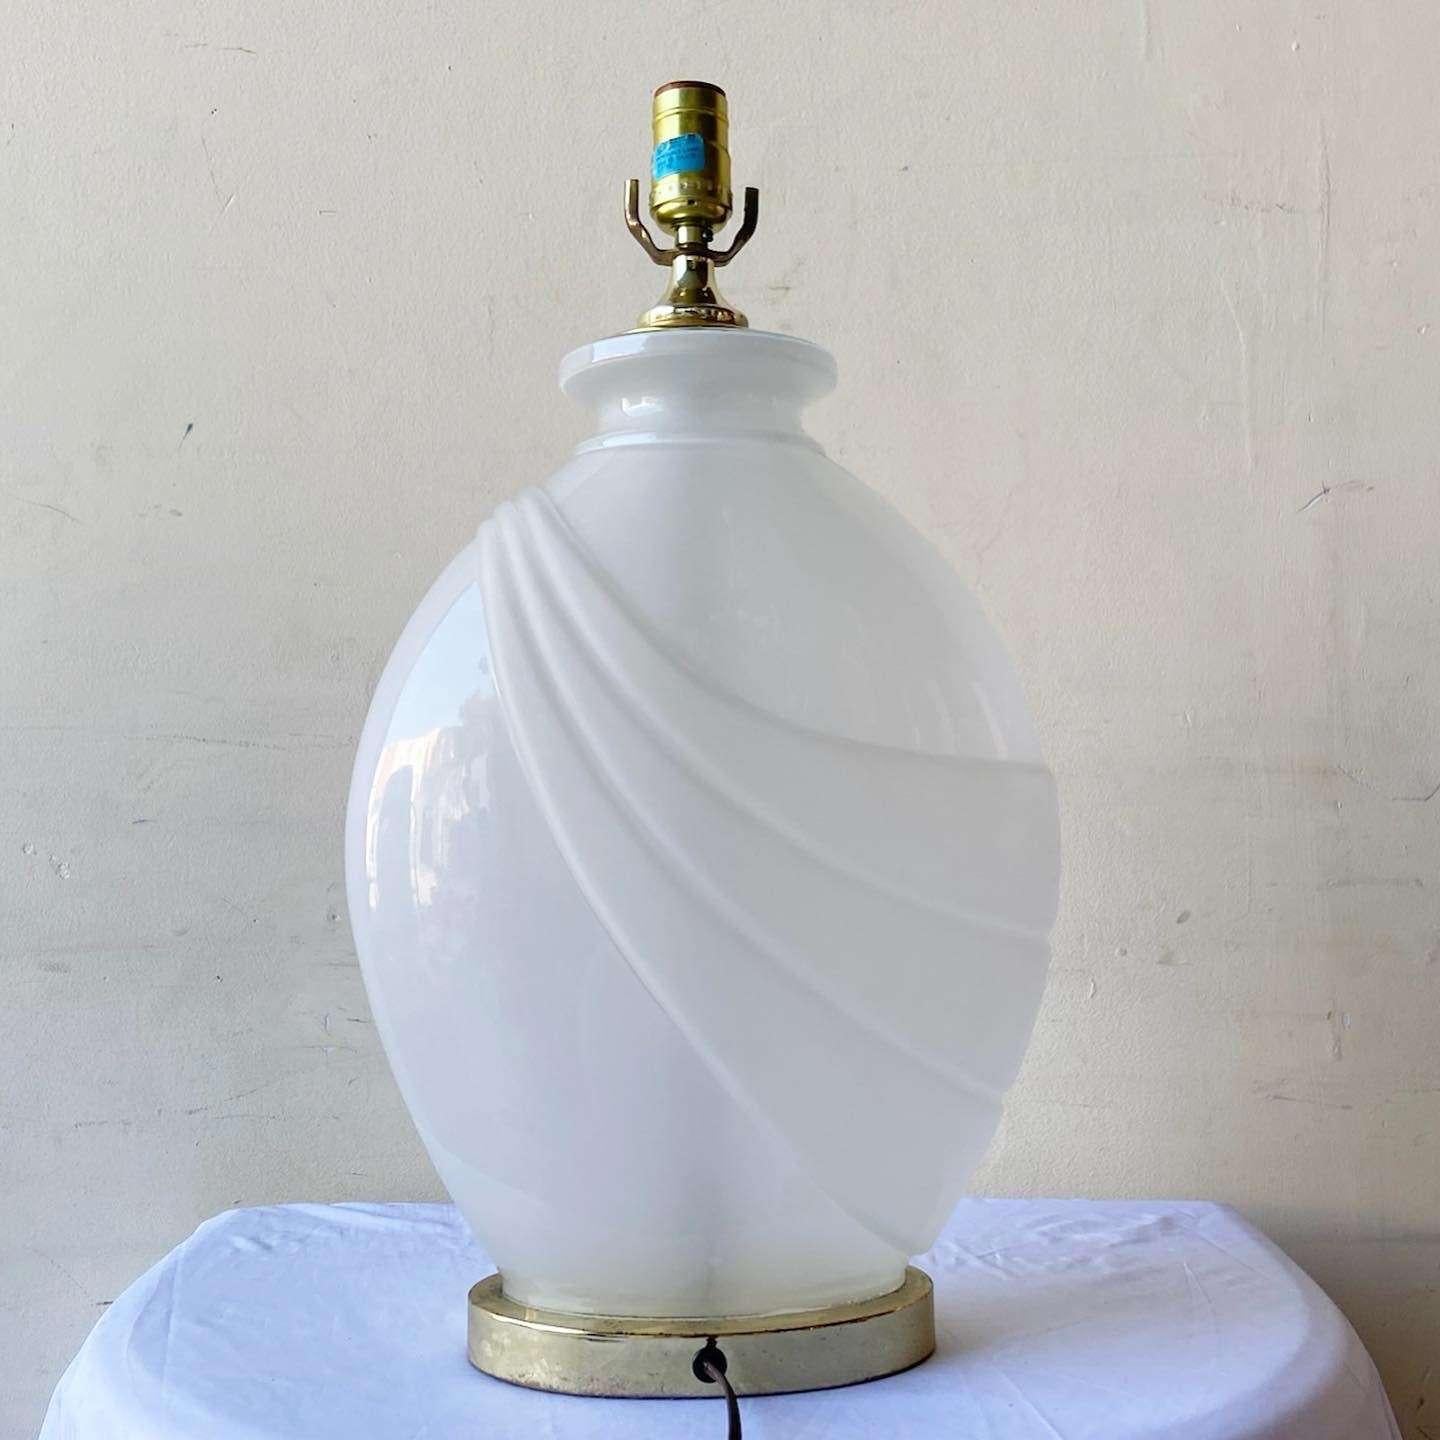 Exceptional vintage 1980s postmodern table lamp. Features a frosted glass on a gold base.
